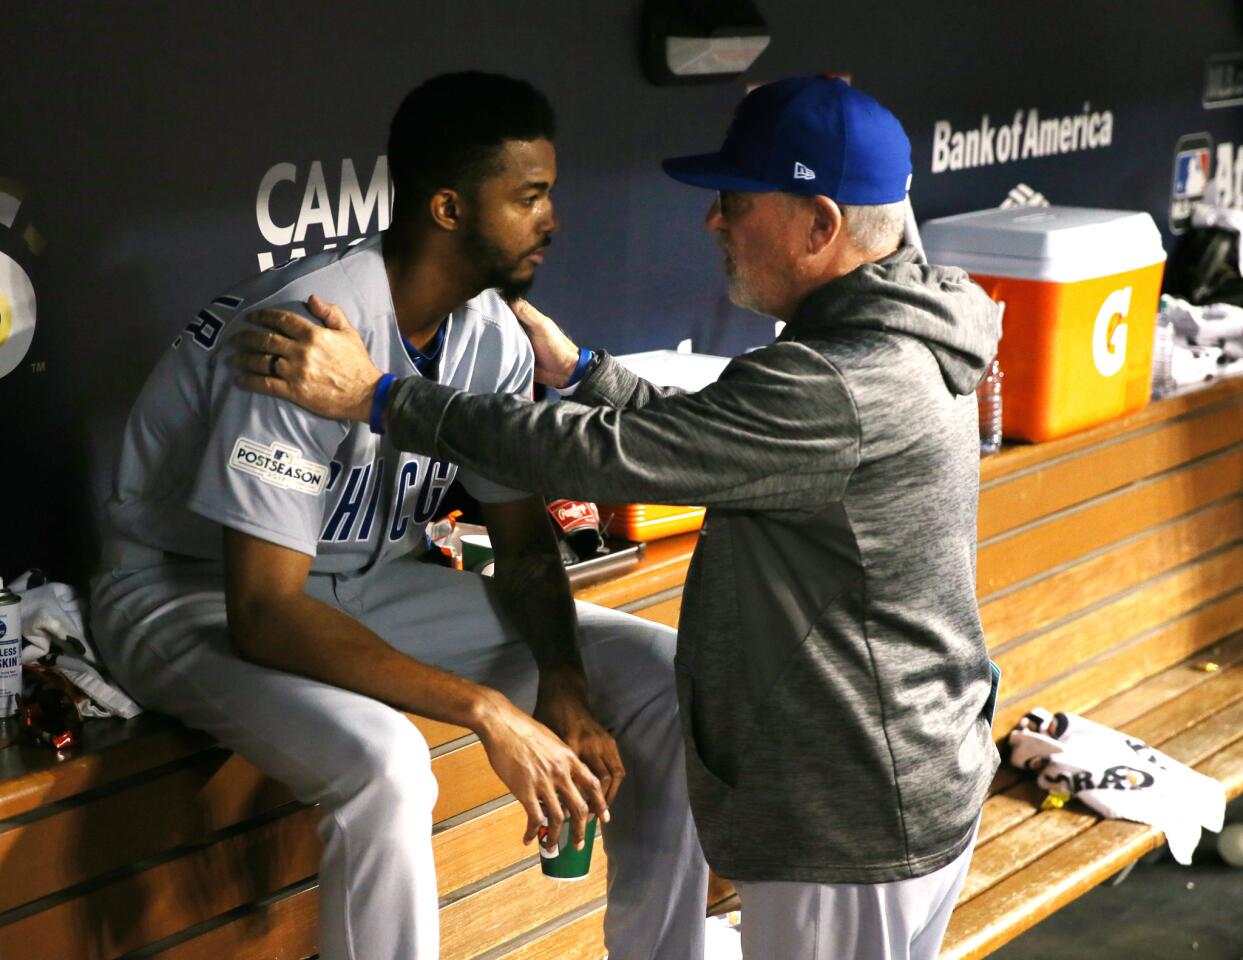 Cubs manager Joe Maddon (70) talks to reliever Carl Edwards Jr. (6) after he pitched the sixth inning Game 2 of the National League Championship Series against the Dodgers at Dodger Stadium in Los Angeles on Sunday, Oct. 15, 2017.